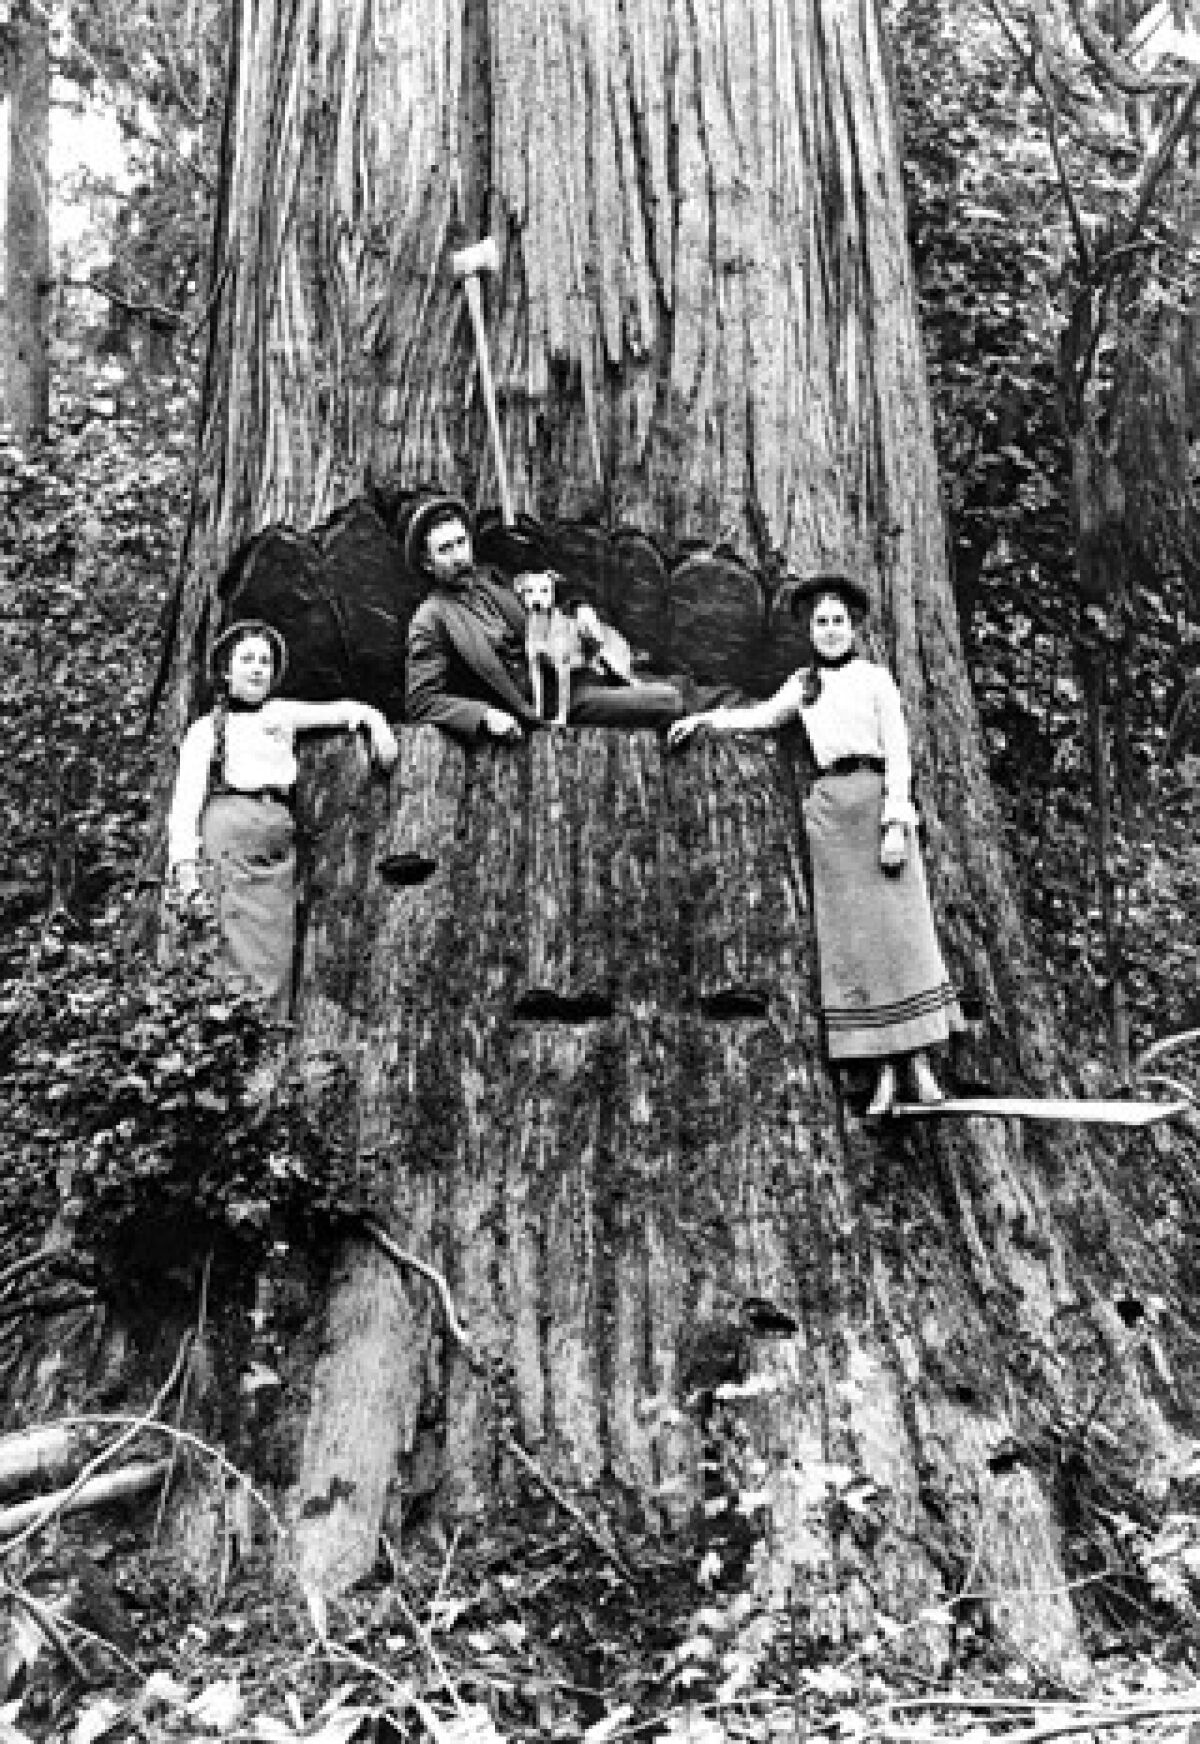 Trees and logging place in U.S. history are explored in 'American Canopy.'